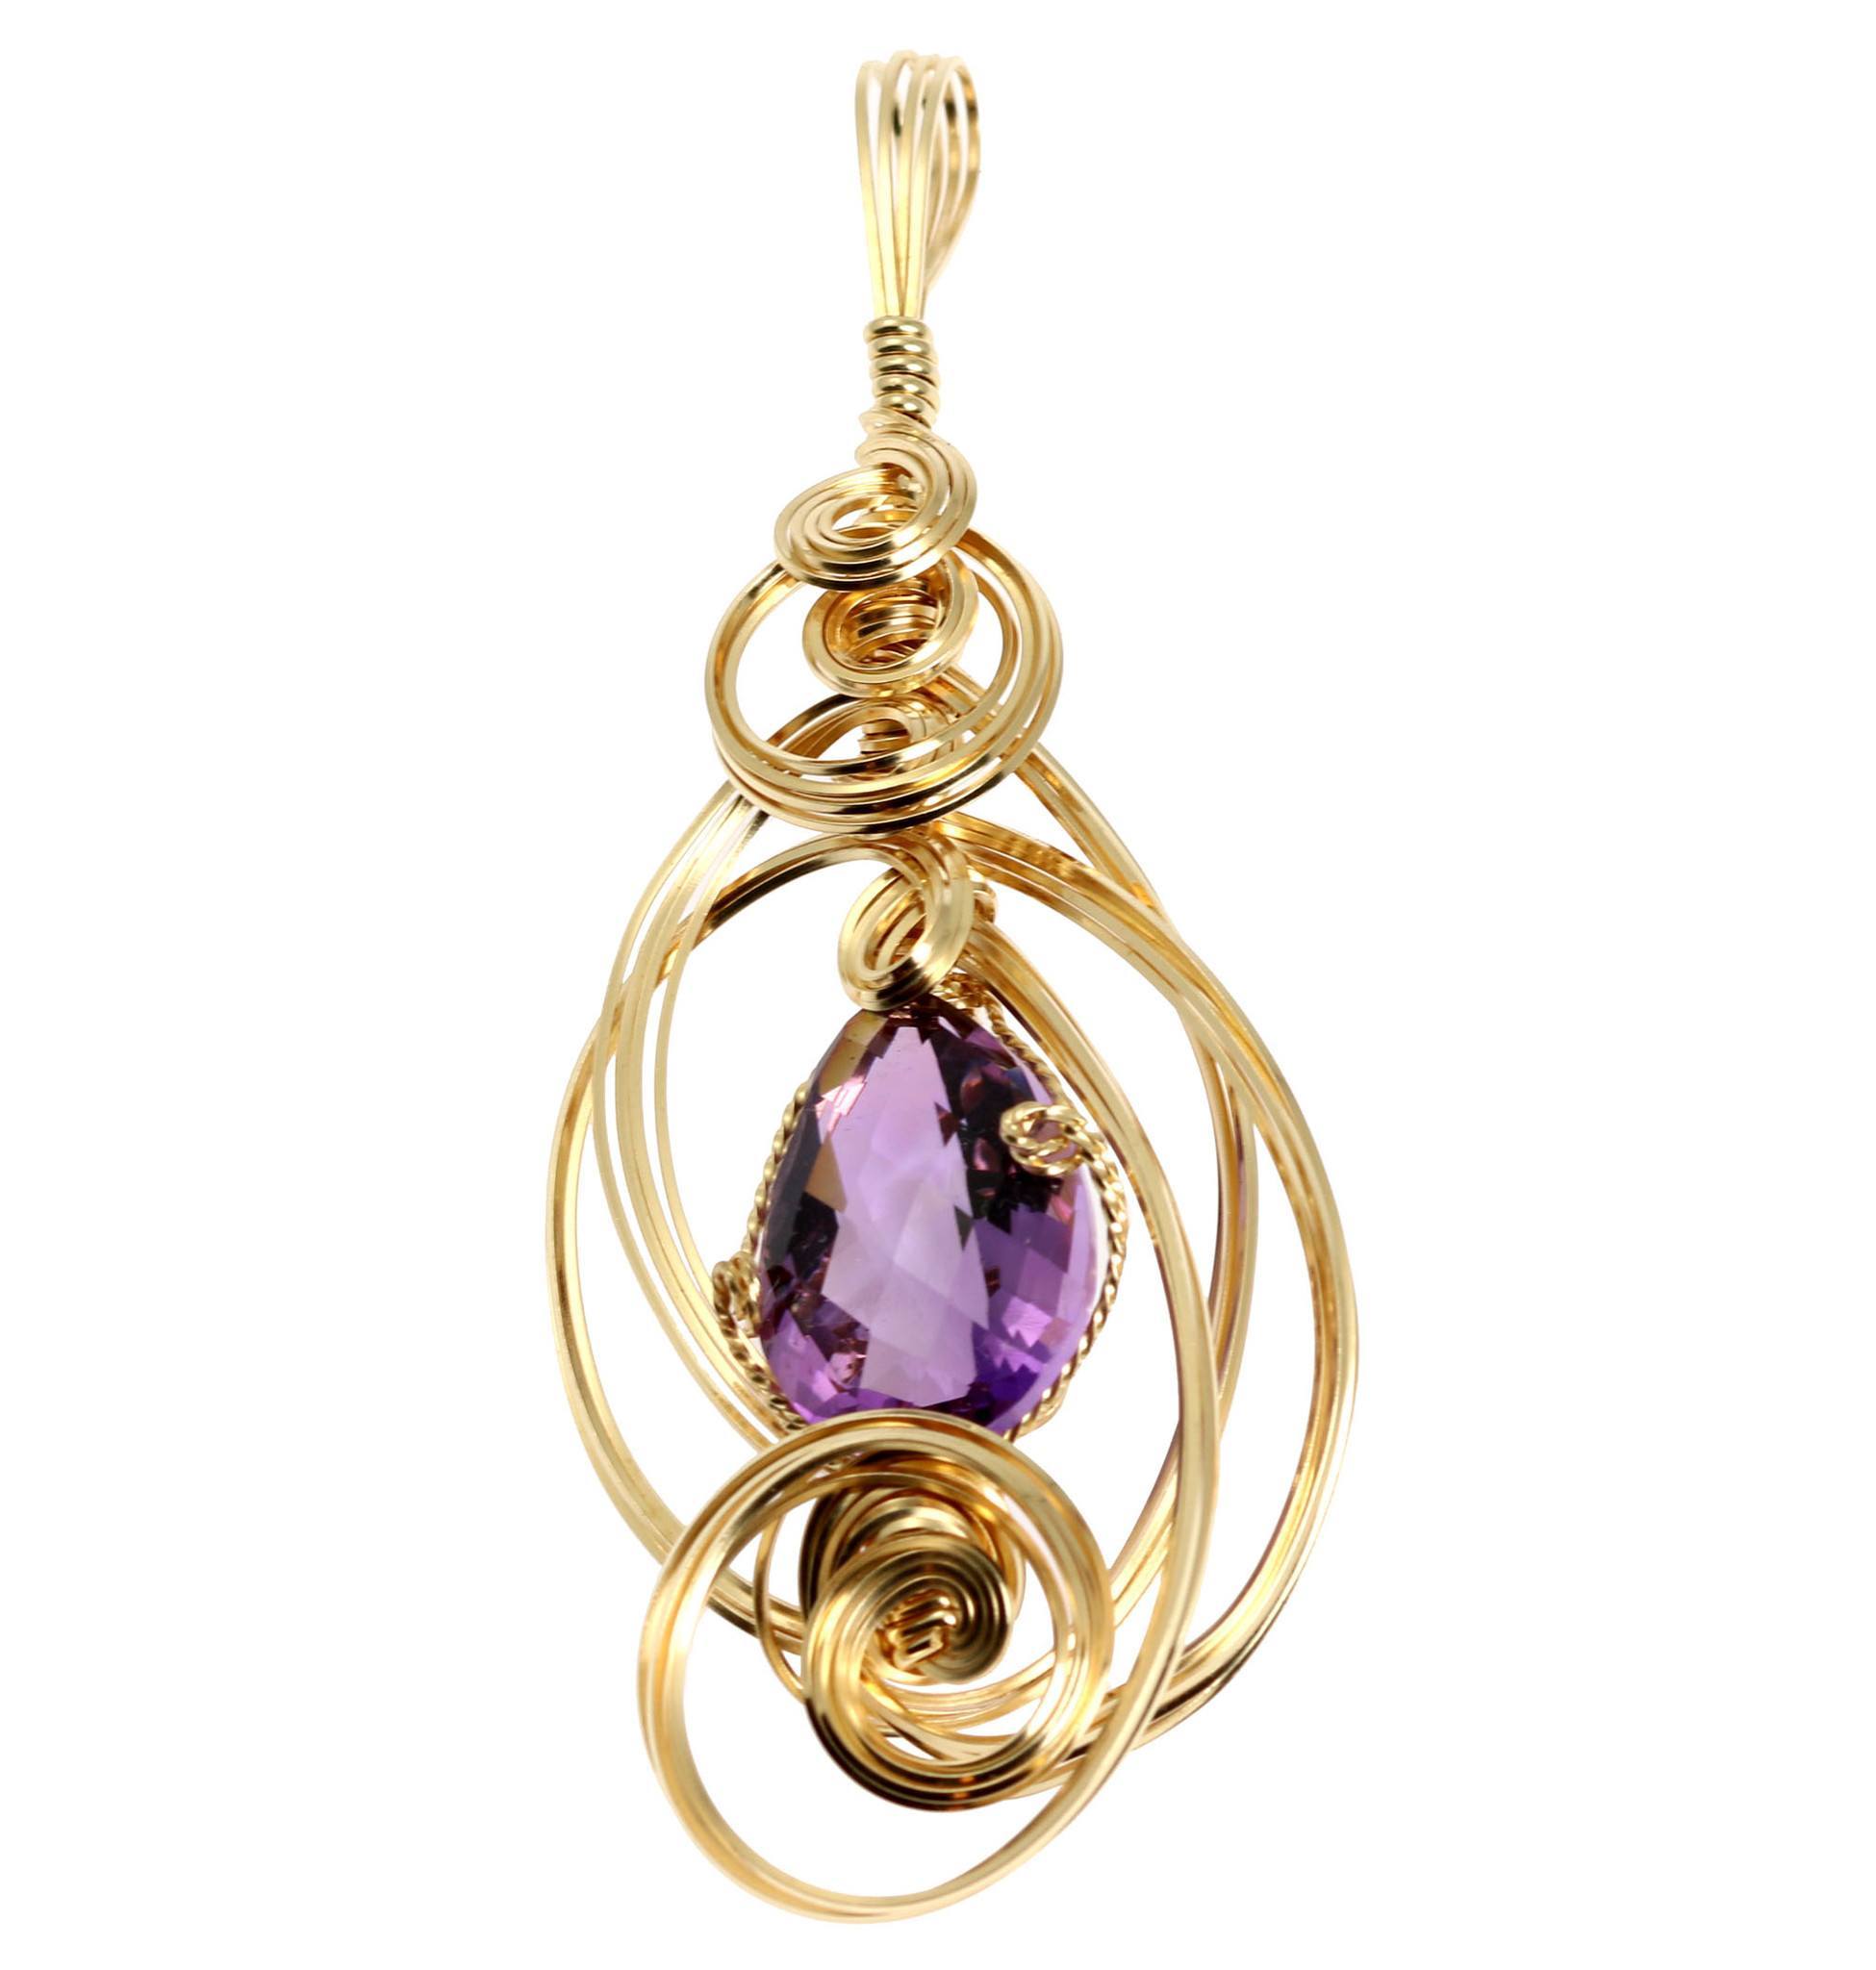 22.5 CT Amethyst 14K Gold-filled Wire Wrapped Pendant